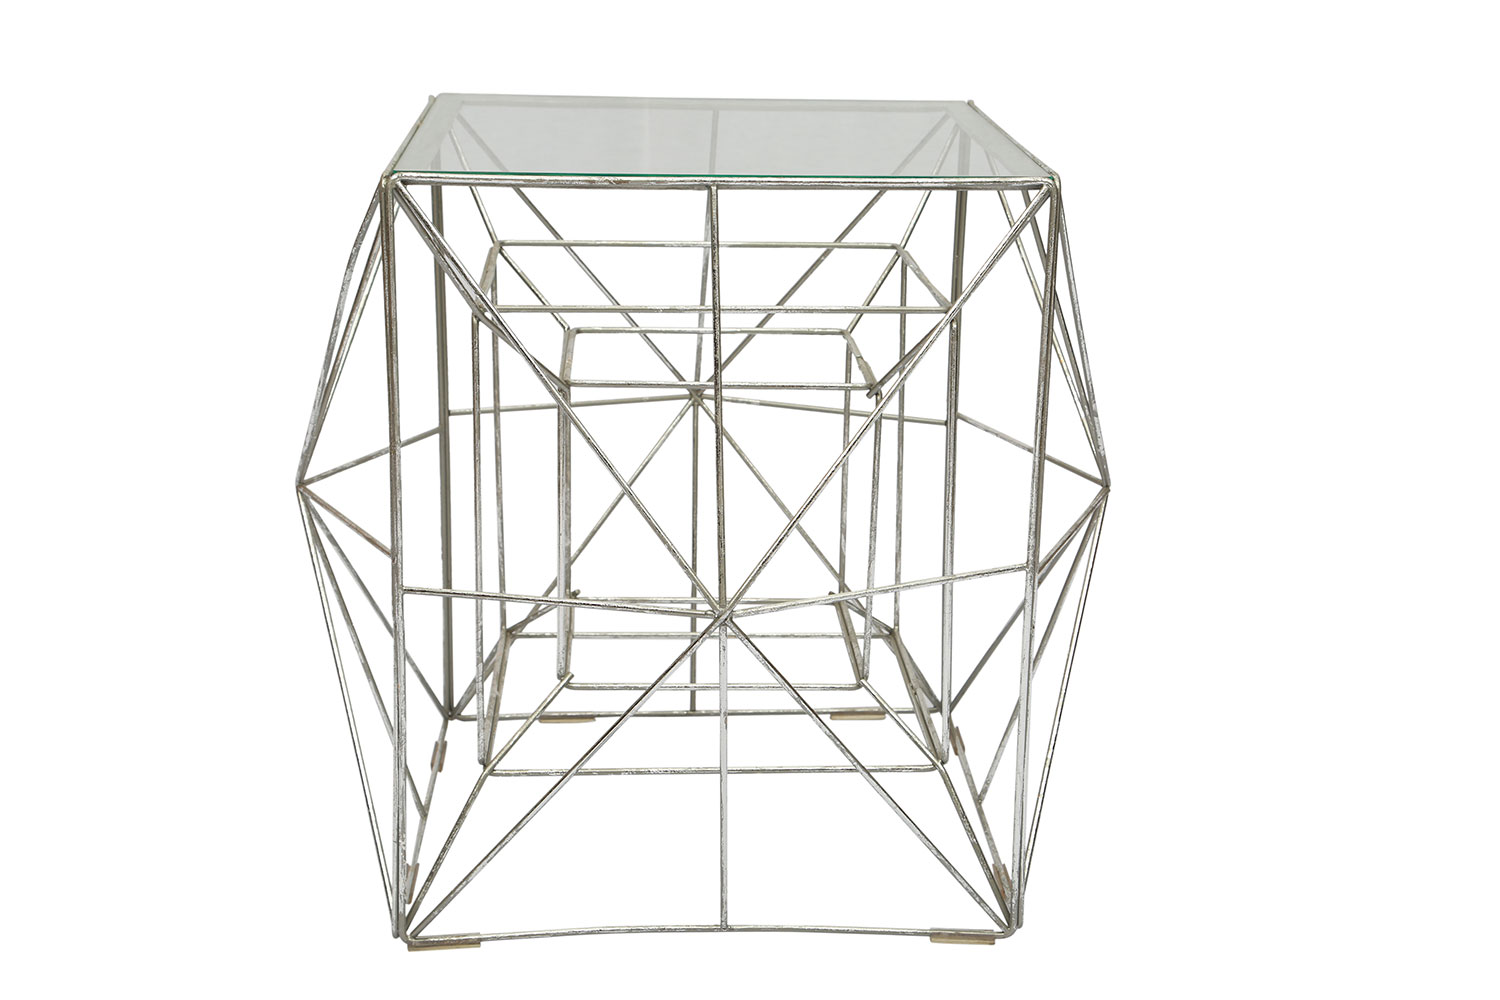 Ren-Wil Infinity Accent Table - Silver Foil